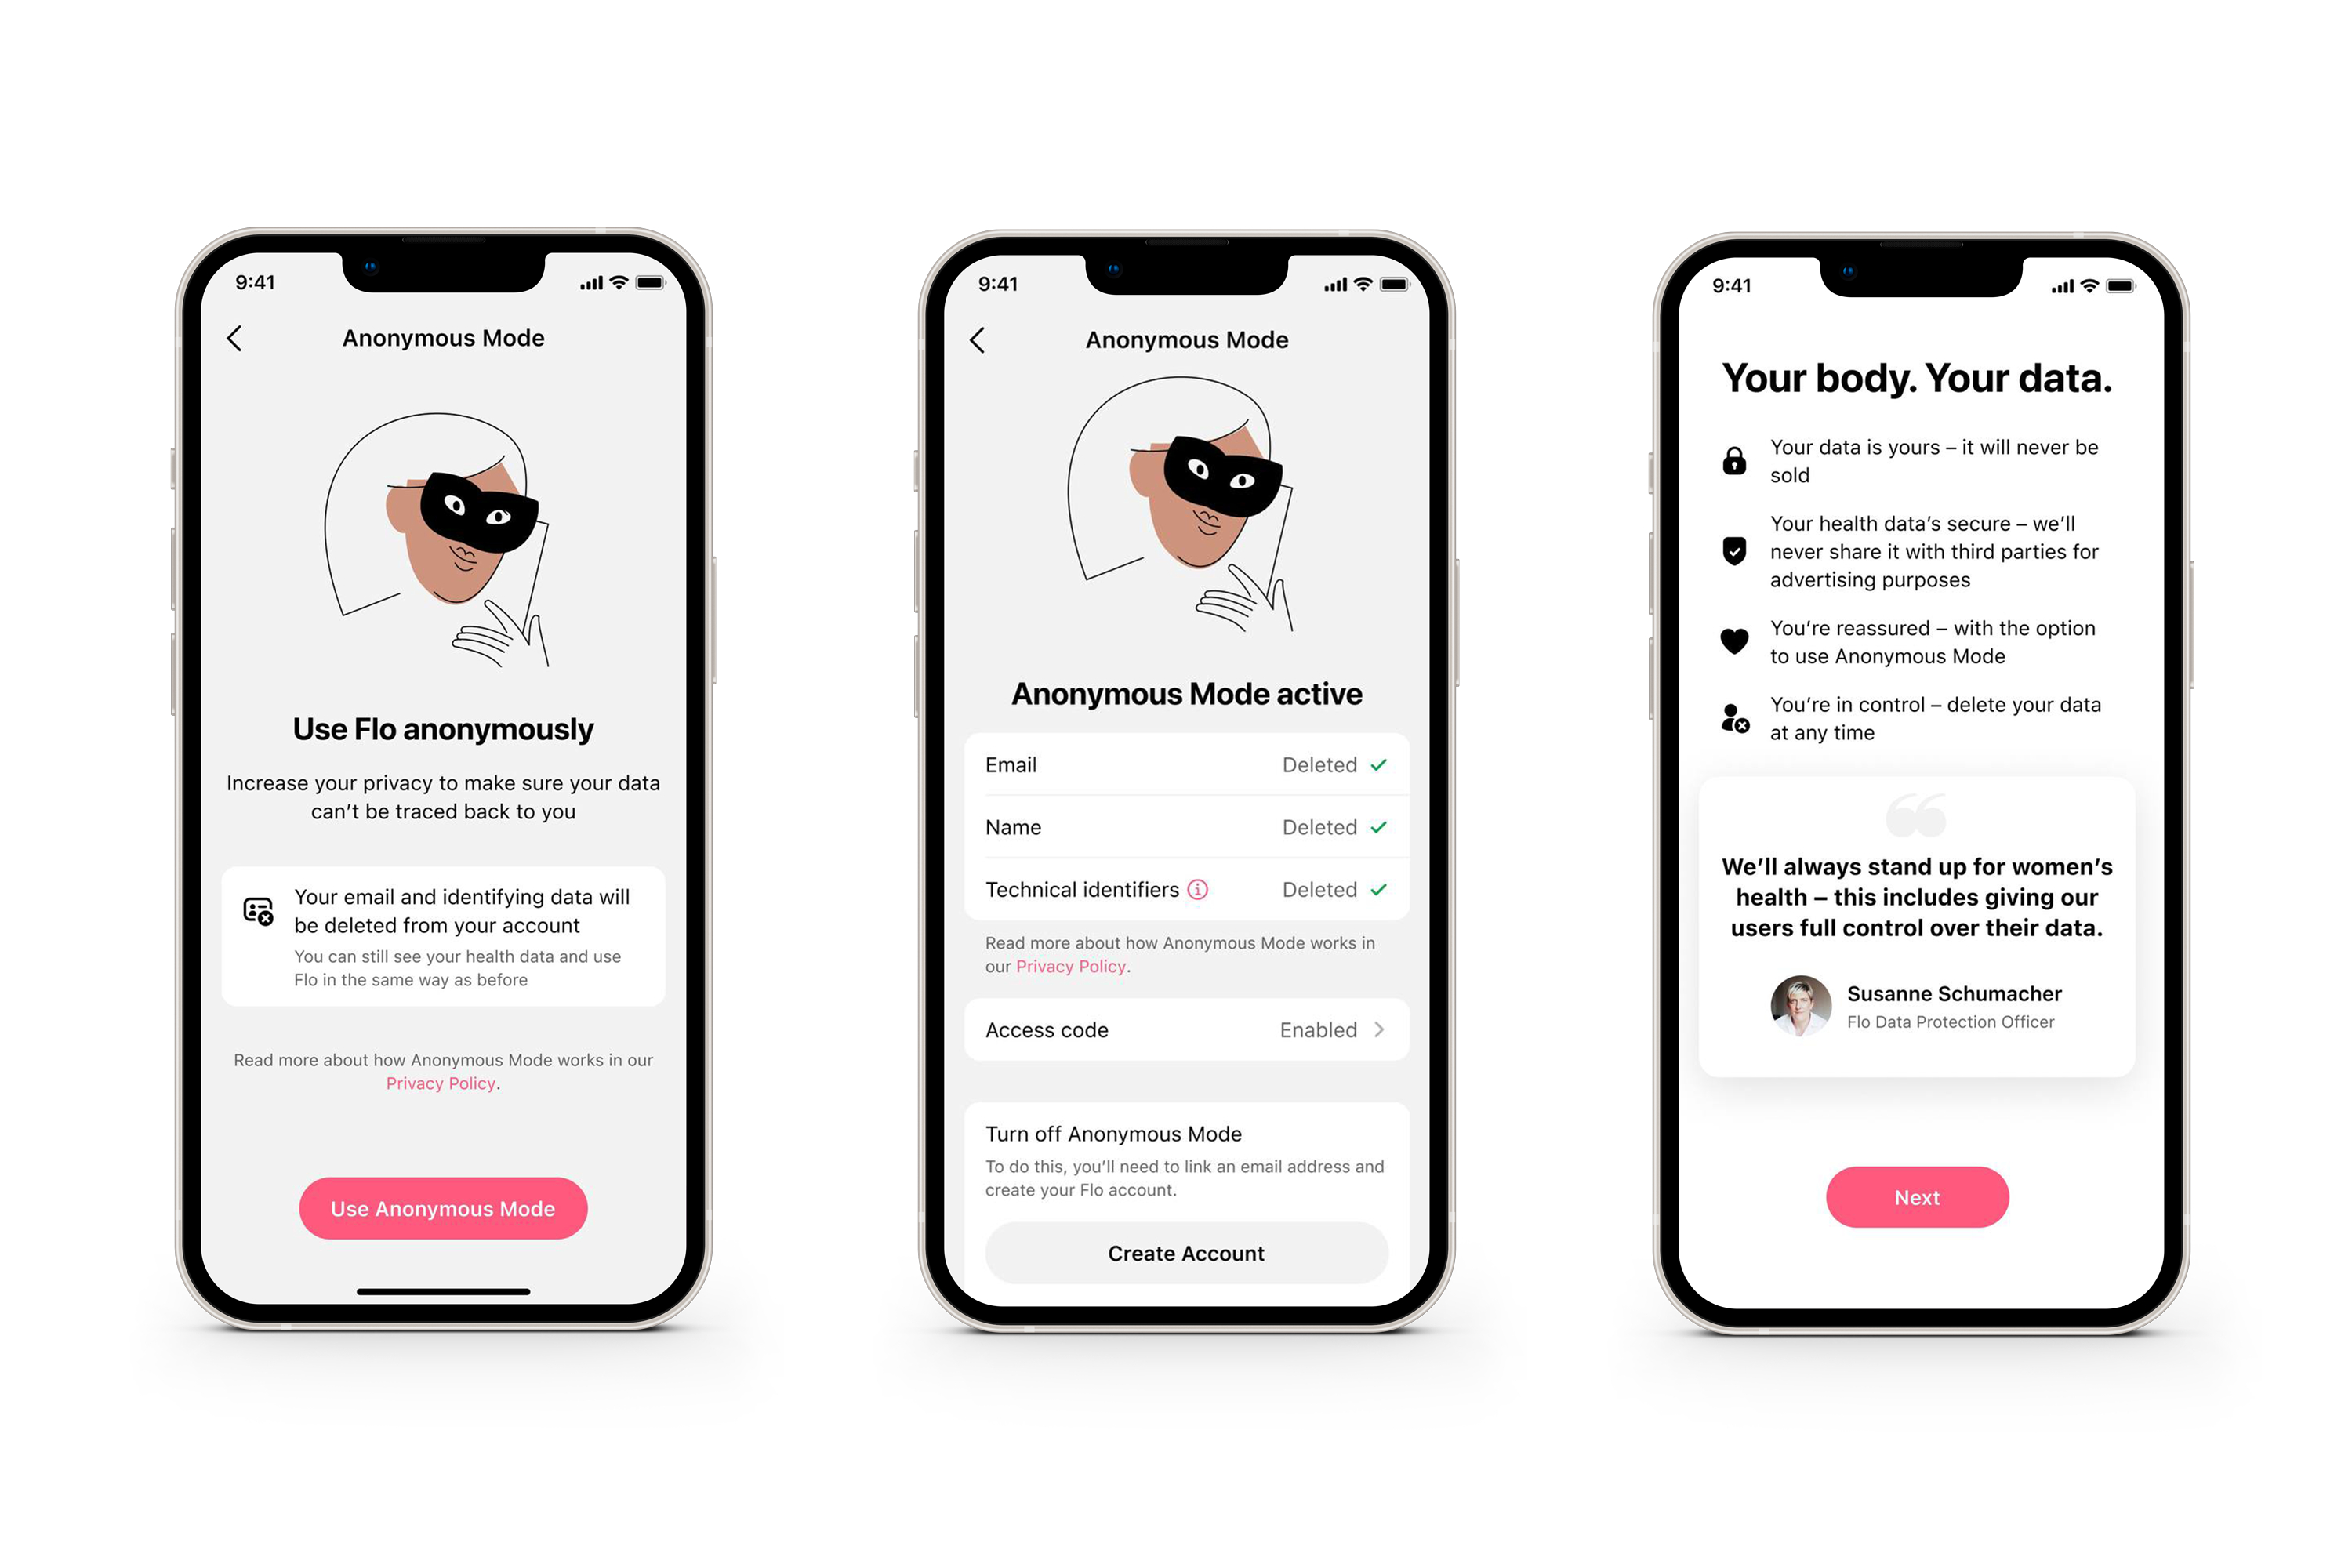 Period tracking app Flo rolls out 'Anonymous Mode' on iOS, Android